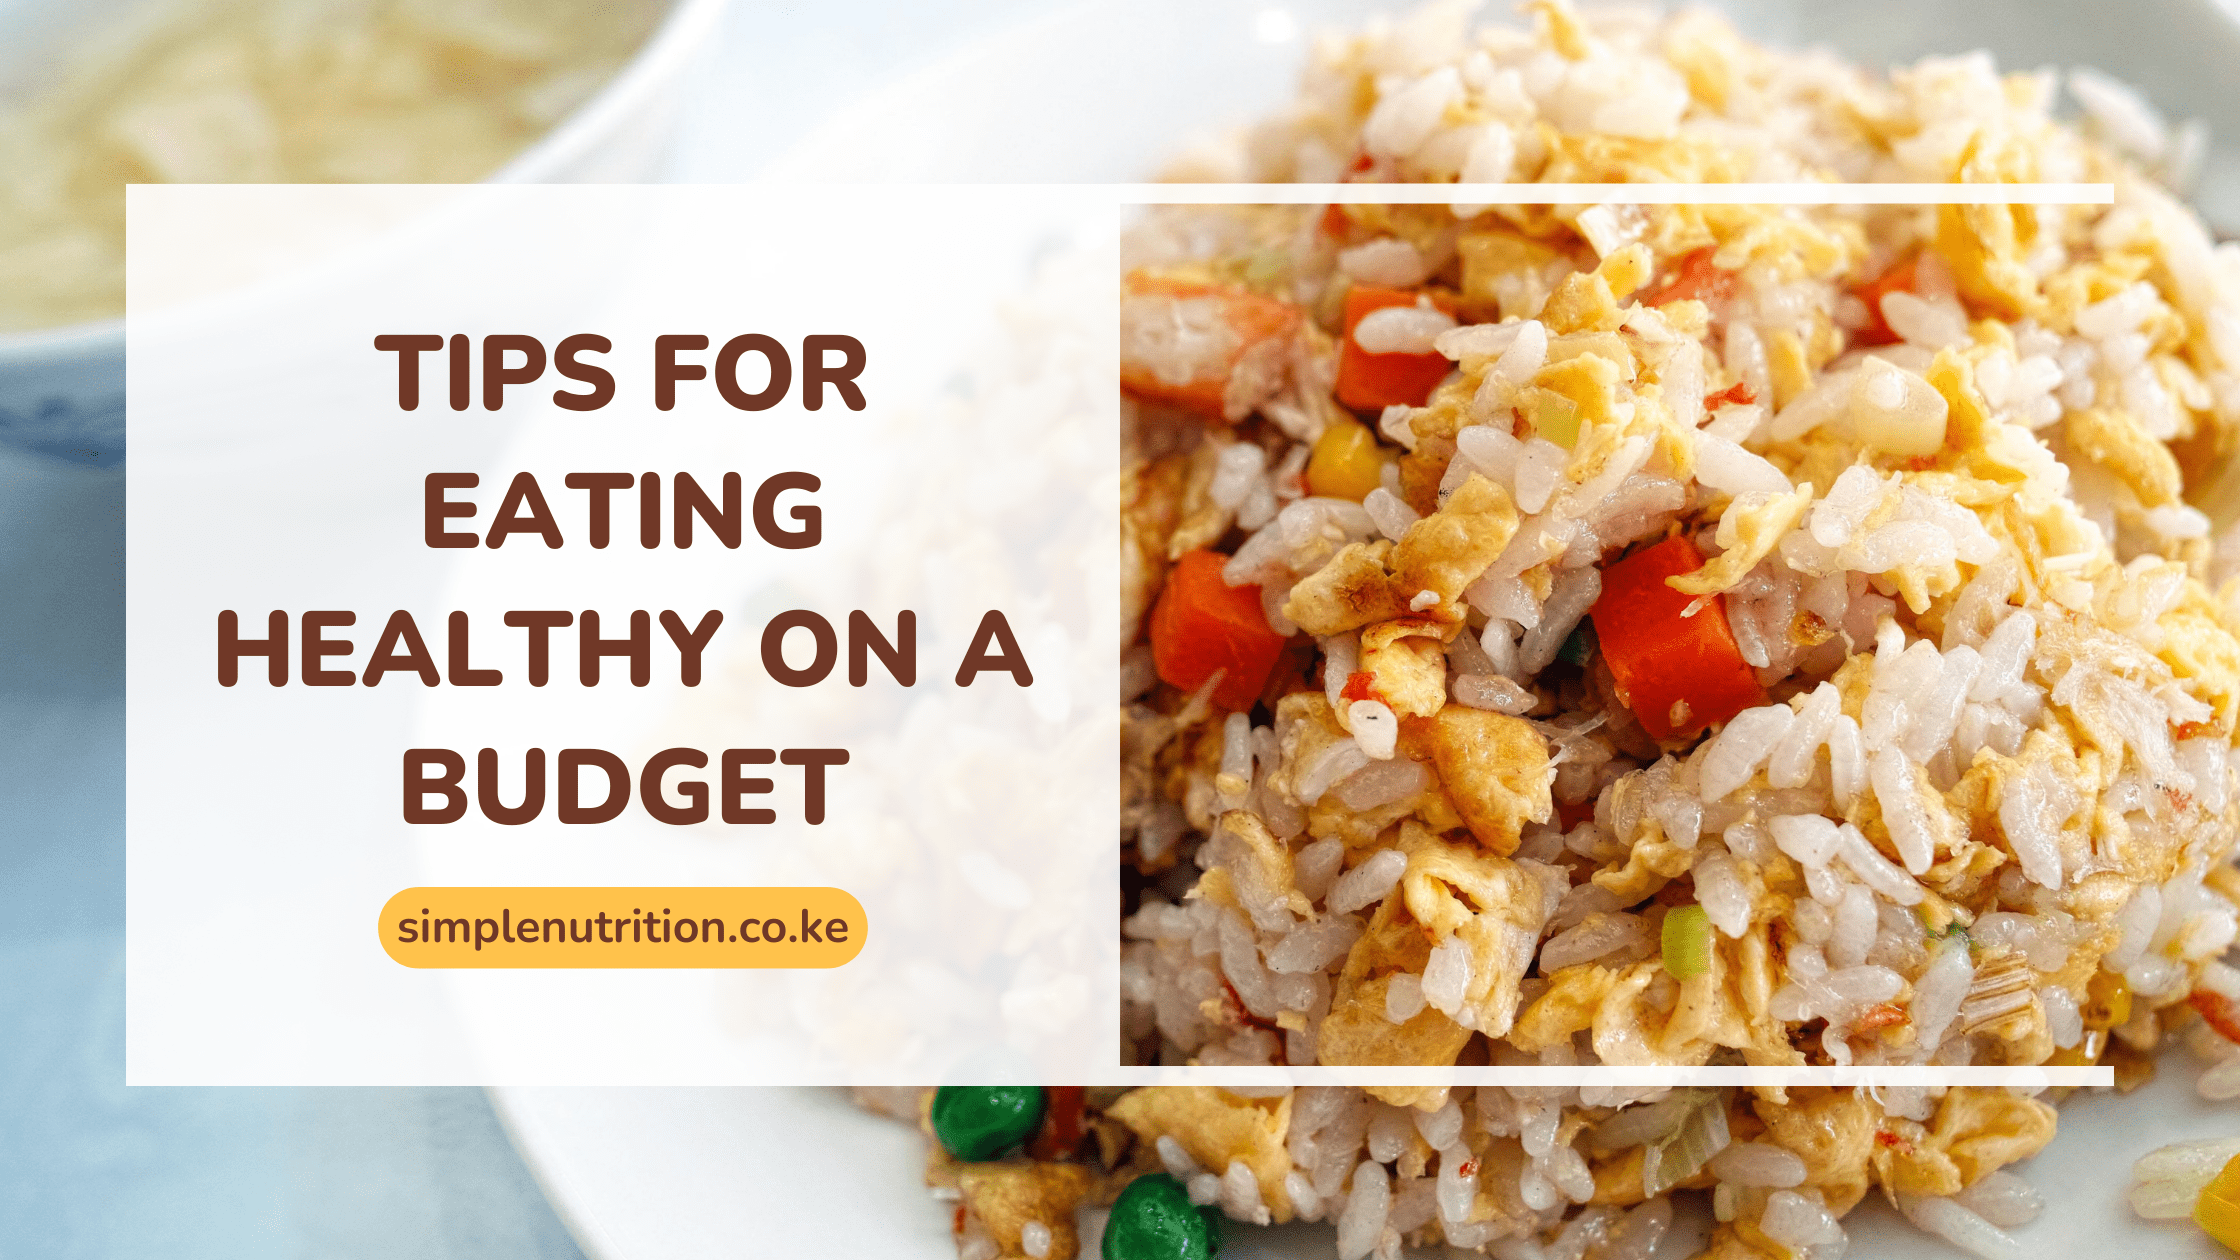 How To Eat Healthy amid rising cost of living.